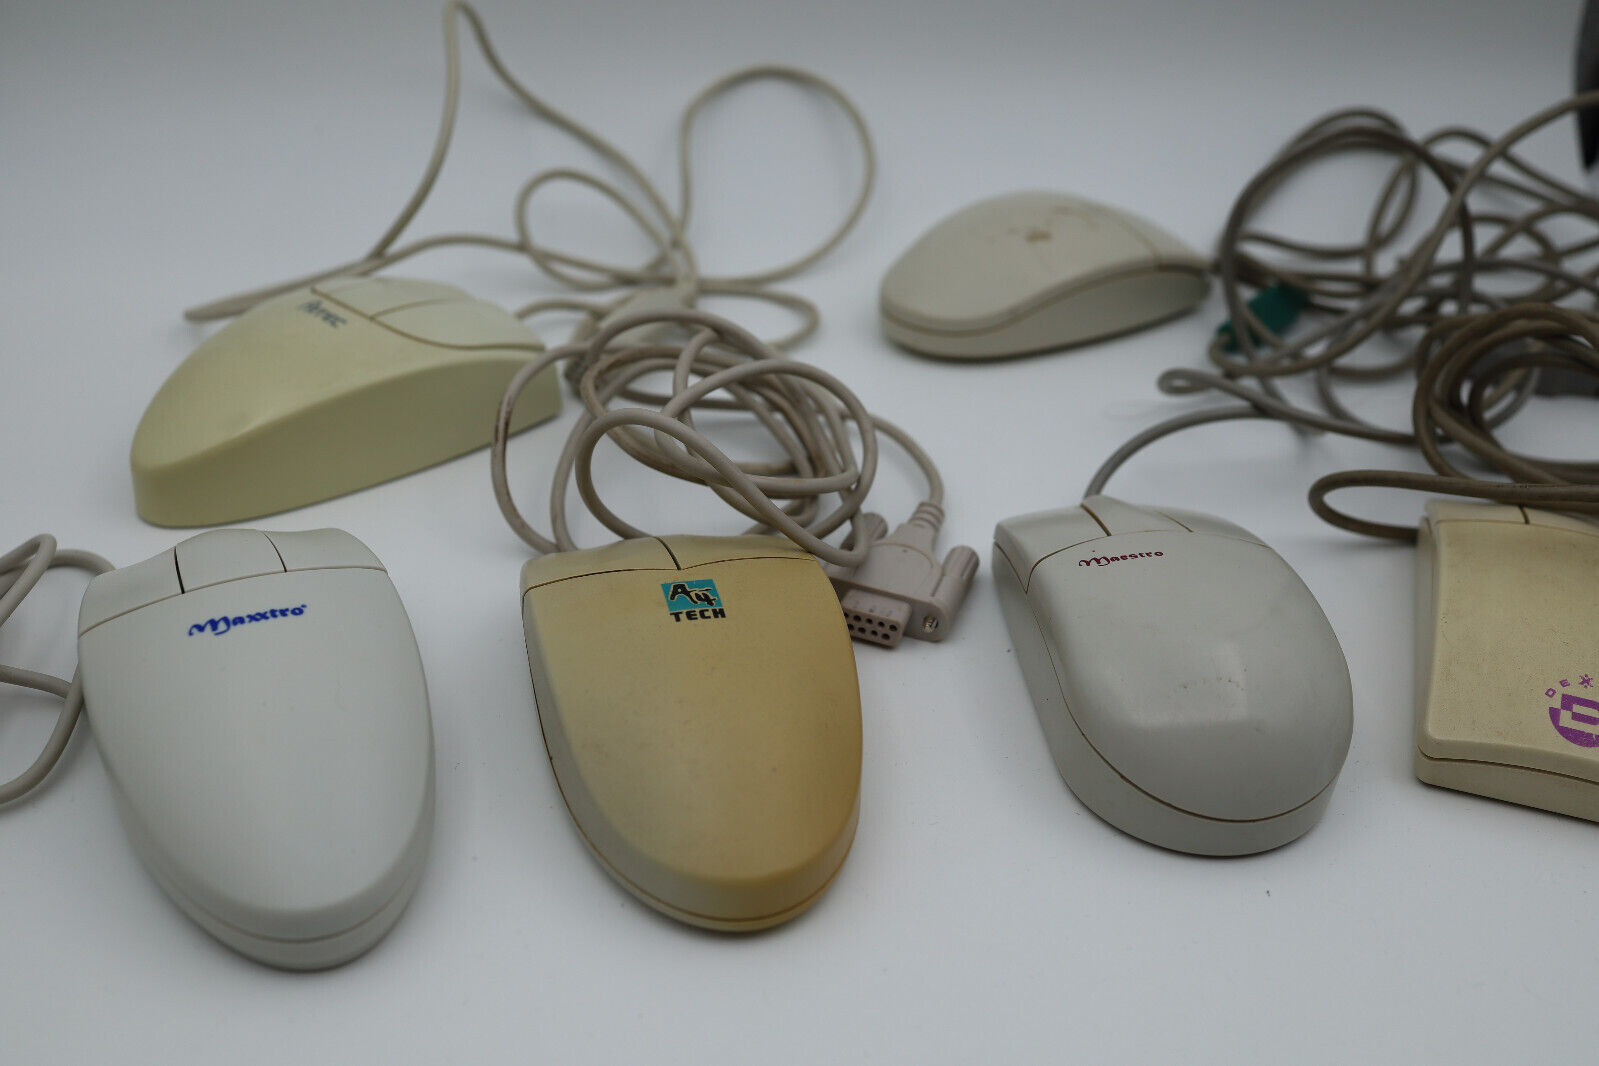 Vintage Retro Serial and PS2 ball mouses mice (6 pieces)